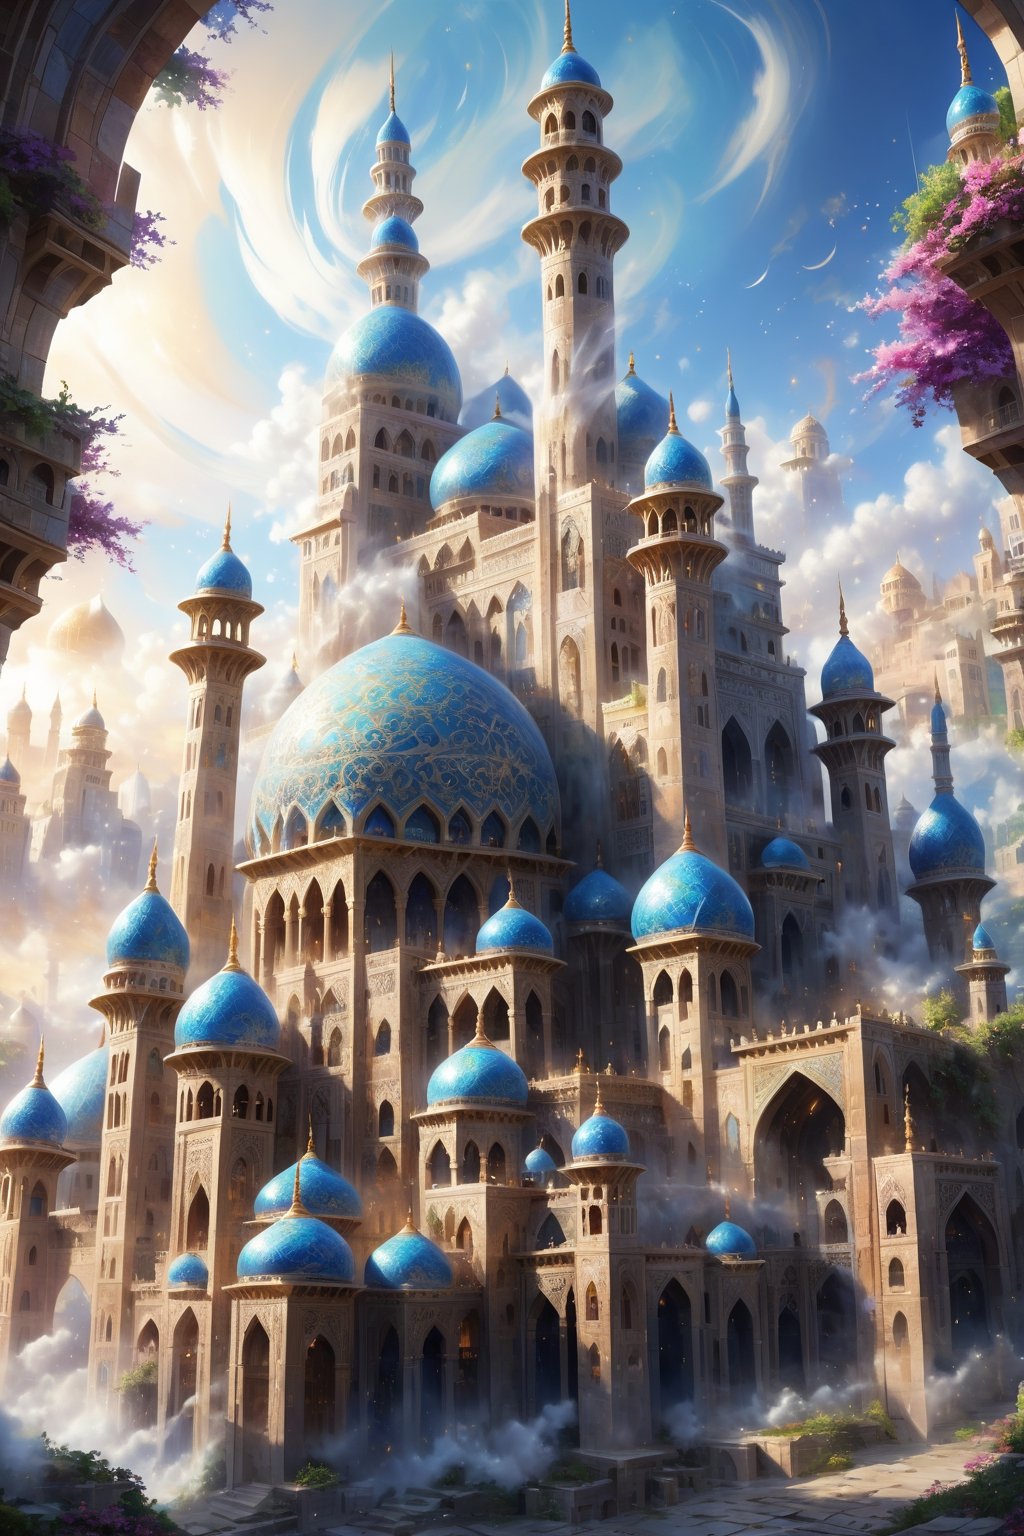 Build a mosque, Great castle, art photography, impressionism, an airbrush painting, masterpiece 8k wallpapper, visionary art style, depth of field, 64 megapixels, detailed painting, splash art, atmospheric dreamscape painting, intricate ornate anime cgi style focus, an oil painting